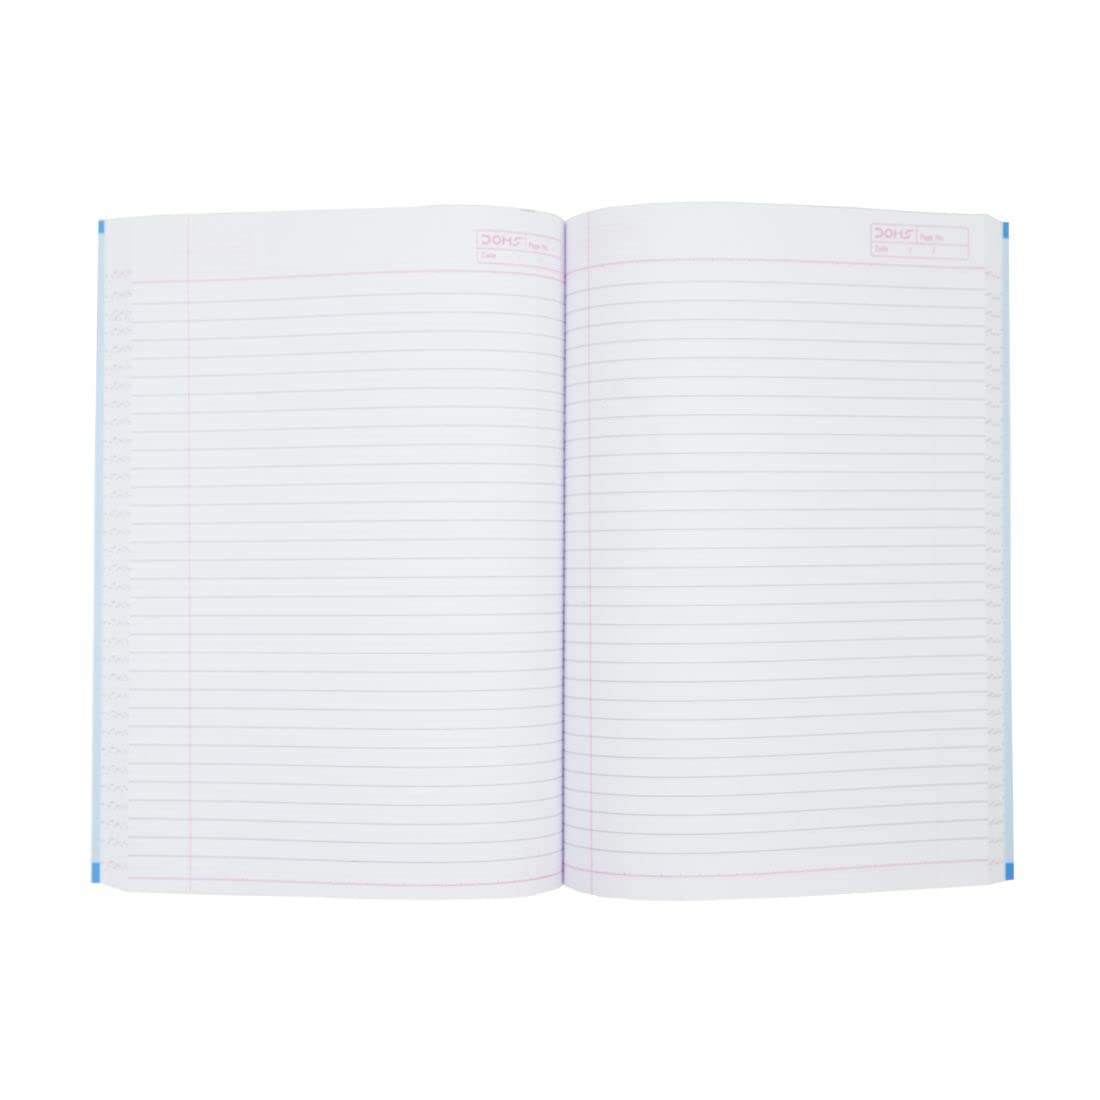 Doms Book World Series | Single Line, 400 Pages | 29.4 x 21 CM | Ideal for School, Home & Office | Pack Of 1 | Color And Design May Vary